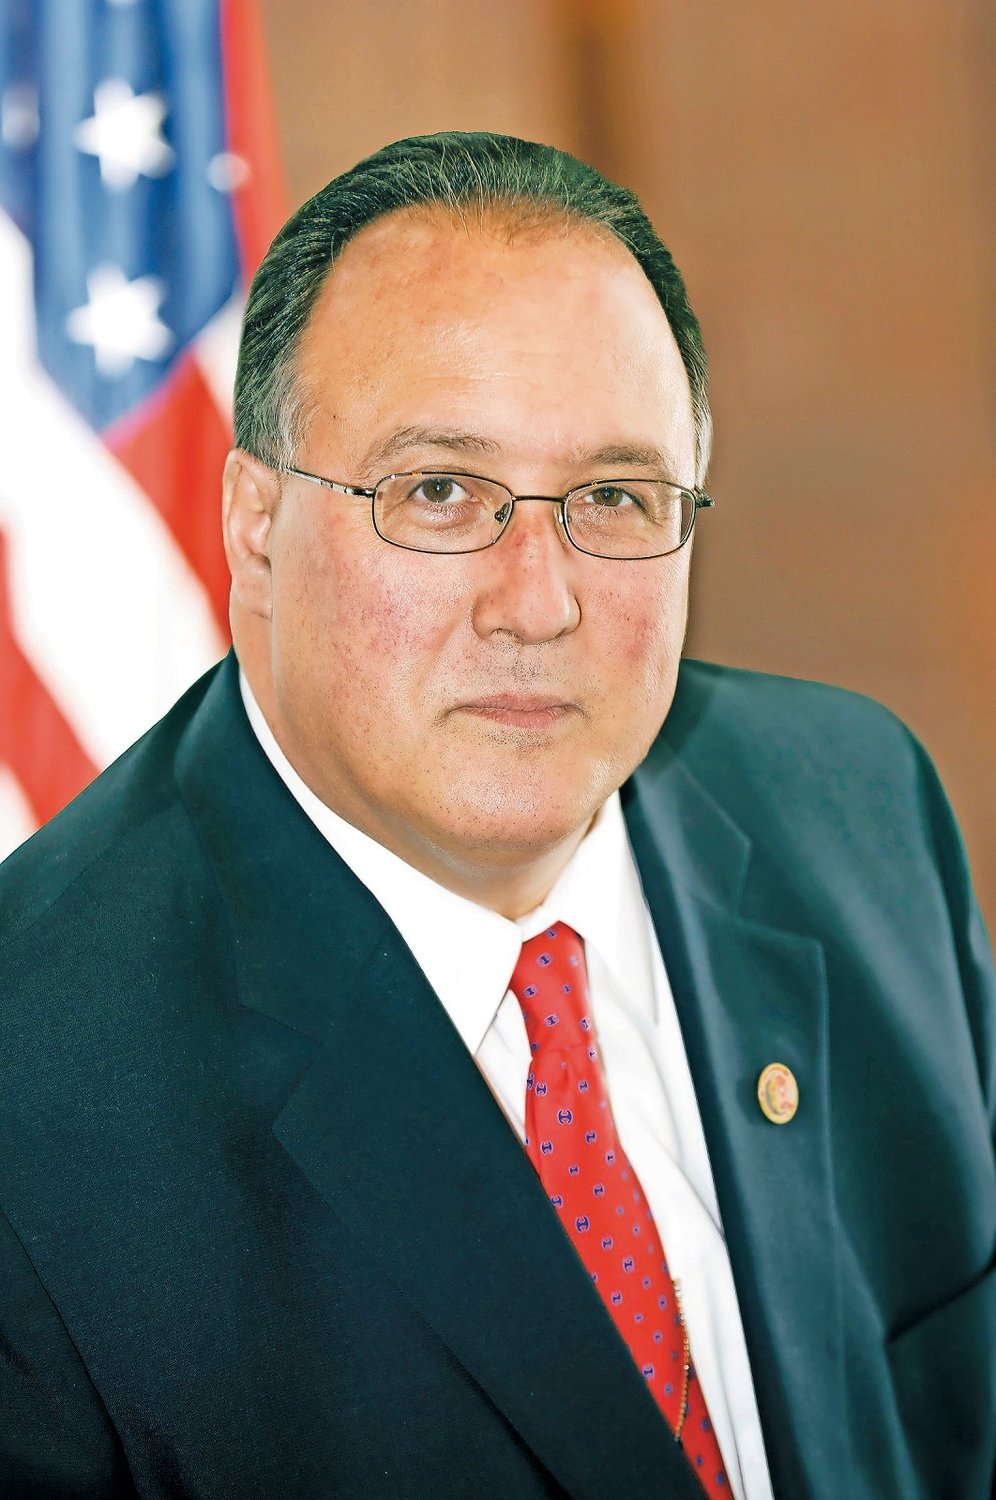 Assemblyman Michael Montesano has been asking for Gov. Cuomo to resign for over a week.